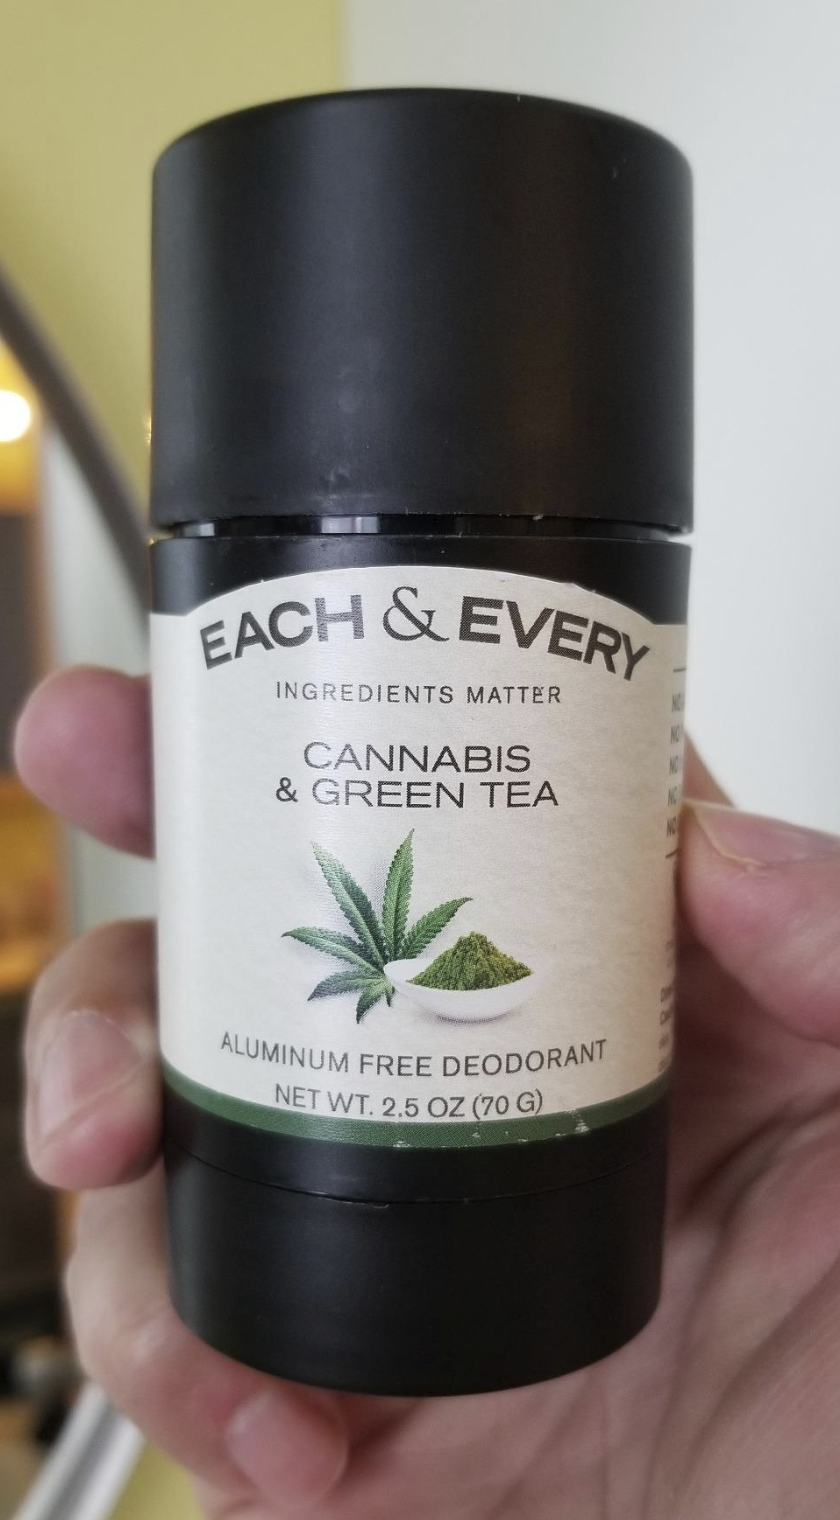 Reviewer&#x27;s hand holding the Cannabis and Green Tea scent of the deodorant